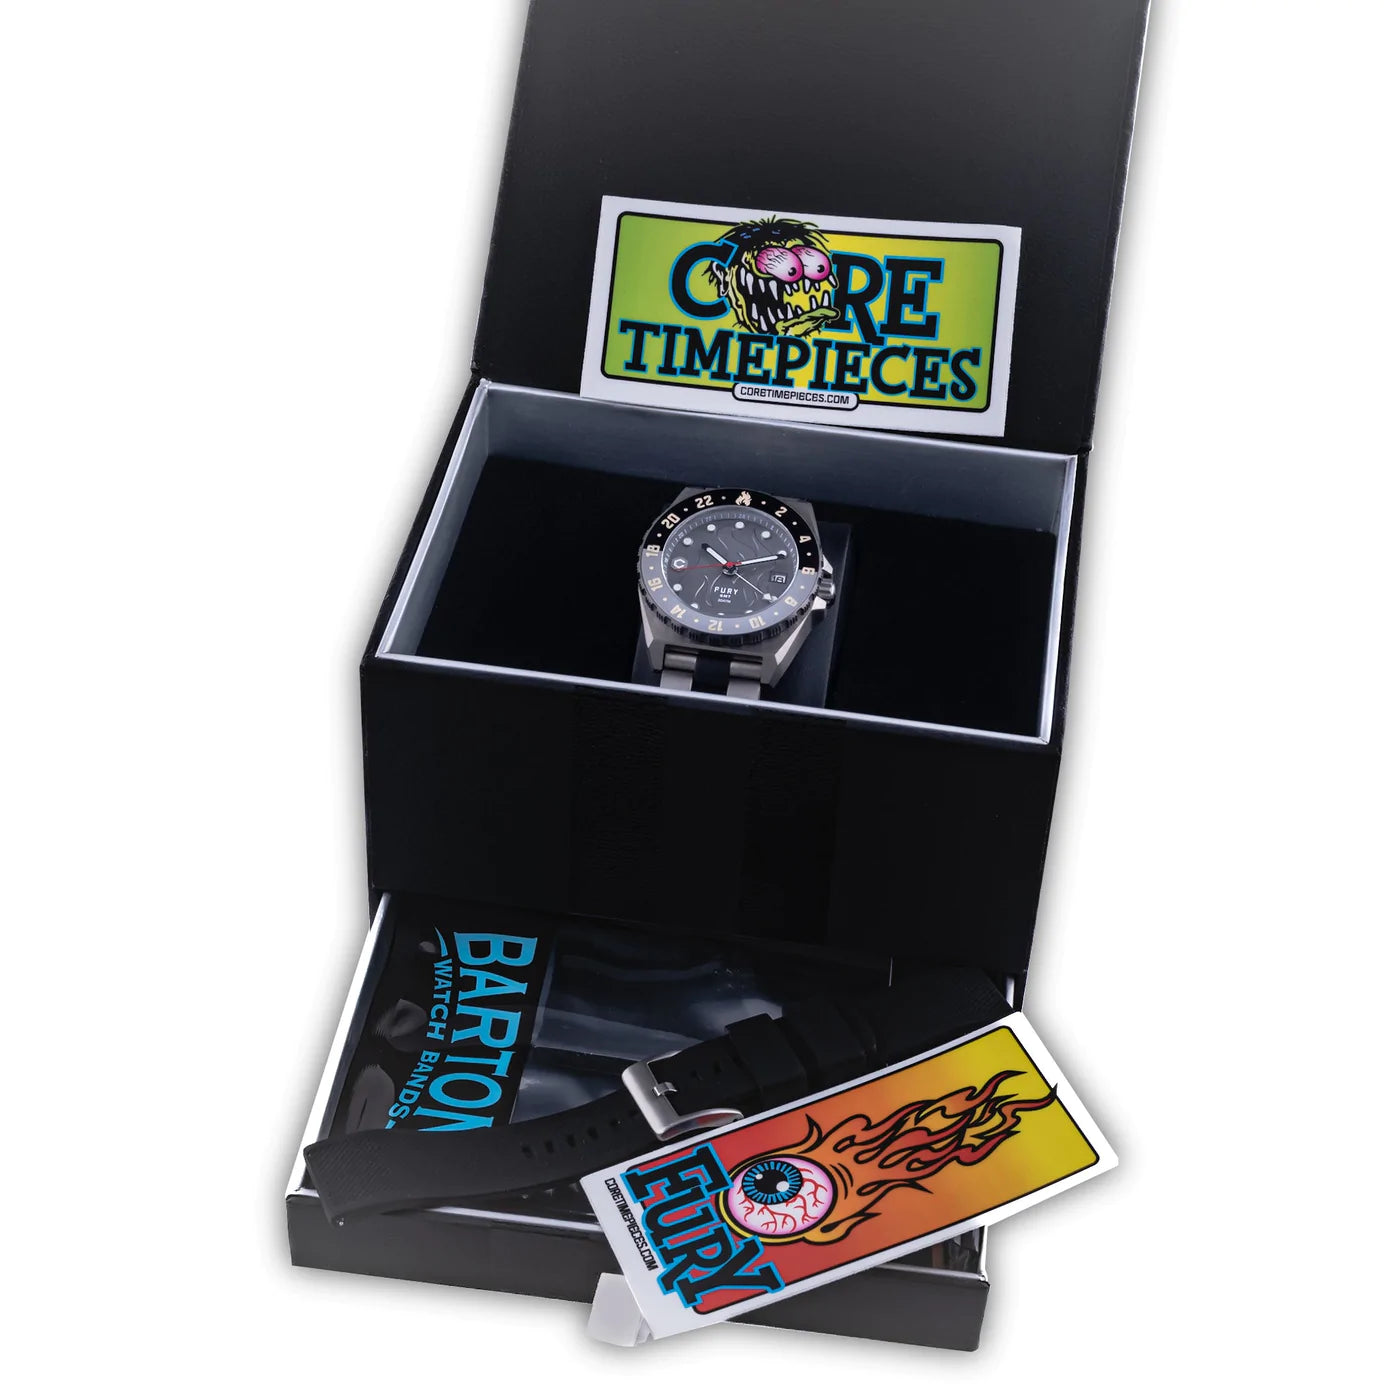 Core Timepieces FURY GMT BLACKTOP Watch